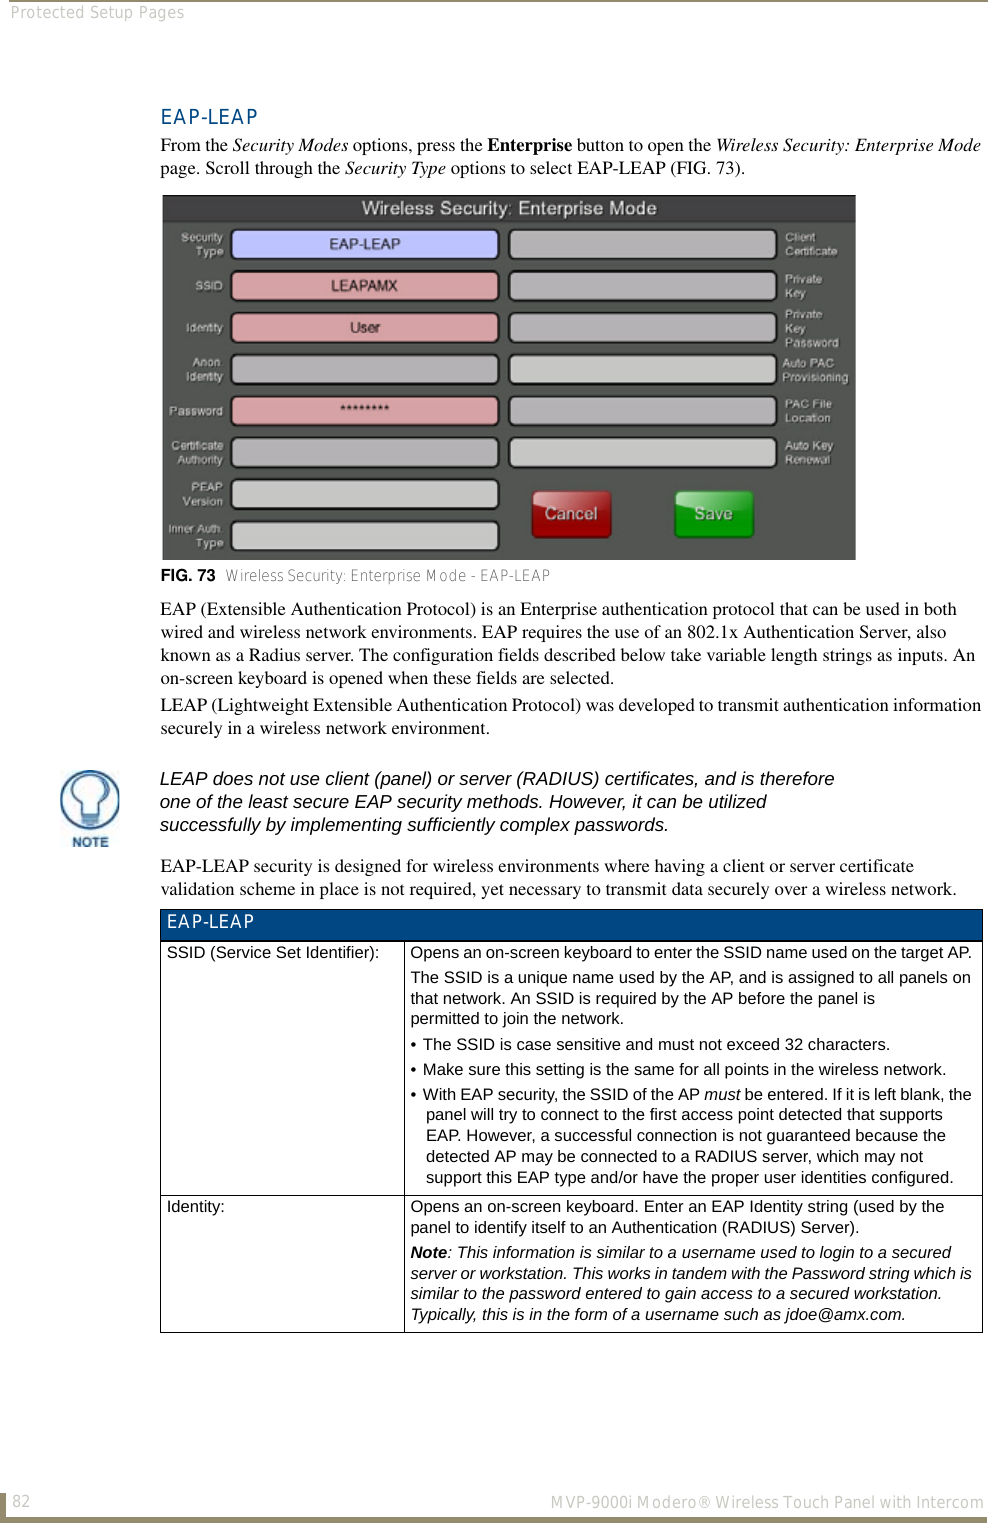 Protected Setup Pages82  MVP-9000i Modero® Wireless Touch Panel with IntercomEAP-LEAPFrom the Security Modes options, press the Enterprise button to open the Wireless Security: Enterprise Mode page. Scroll through the Security Type options to select EAP-LEAP (FIG. 73). EAP (Extensible Authentication Protocol) is an Enterprise authentication protocol that can be used in both wired and wireless network environments. EAP requires the use of an 802.1x Authentication Server, also known as a Radius server. The configuration fields described below take variable length strings as inputs. An on-screen keyboard is opened when these fields are selected.LEAP (Lightweight Extensible Authentication Protocol) was developed to transmit authentication information securely in a wireless network environment.EAP-LEAP security is designed for wireless environments where having a client or server certificate validation scheme in place is not required, yet necessary to transmit data securely over a wireless network.  FIG. 73  Wireless Security: Enterprise Mode - EAP-LEAPLEAP does not use client (panel) or server (RADIUS) certificates, and is therefore one of the least secure EAP security methods. However, it can be utilized successfully by implementing sufficiently complex passwords.EAP-LEAPSSID (Service Set Identifier): Opens an on-screen keyboard to enter the SSID name used on the target AP. The SSID is a unique name used by the AP, and is assigned to all panels on that network. An SSID is required by the AP before the panel is permitted to join the network. • The SSID is case sensitive and must not exceed 32 characters. • Make sure this setting is the same for all points in the wireless network.• With EAP security, the SSID of the AP must be entered. If it is left blank, the panel will try to connect to the first access point detected that supports EAP. However, a successful connection is not guaranteed because the detected AP may be connected to a RADIUS server, which may not support this EAP type and/or have the proper user identities configured.Identity: Opens an on-screen keyboard. Enter an EAP Identity string (used by the panel to identify itself to an Authentication (RADIUS) Server). Note: This information is similar to a username used to login to a secured server or workstation. This works in tandem with the Password string which is similar to the password entered to gain access to a secured workstation. Typically, this is in the form of a username such as jdoe@amx.com.